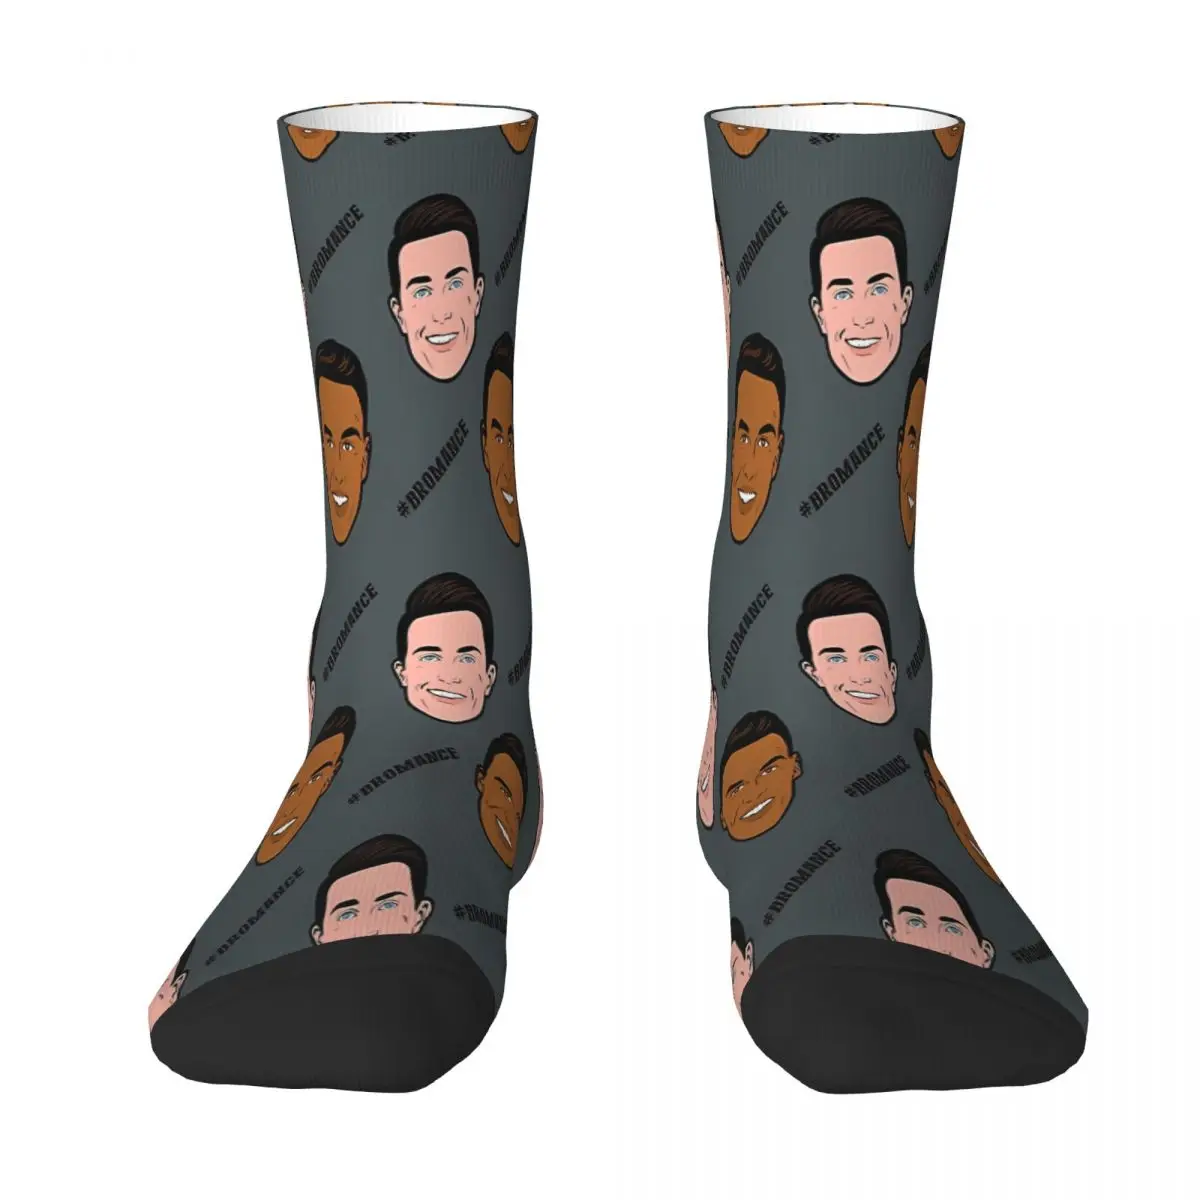 

Aaron And James From Bachelor In Paradise Sock Socks Men Women Polyester Stockings Customizable Hip Hop